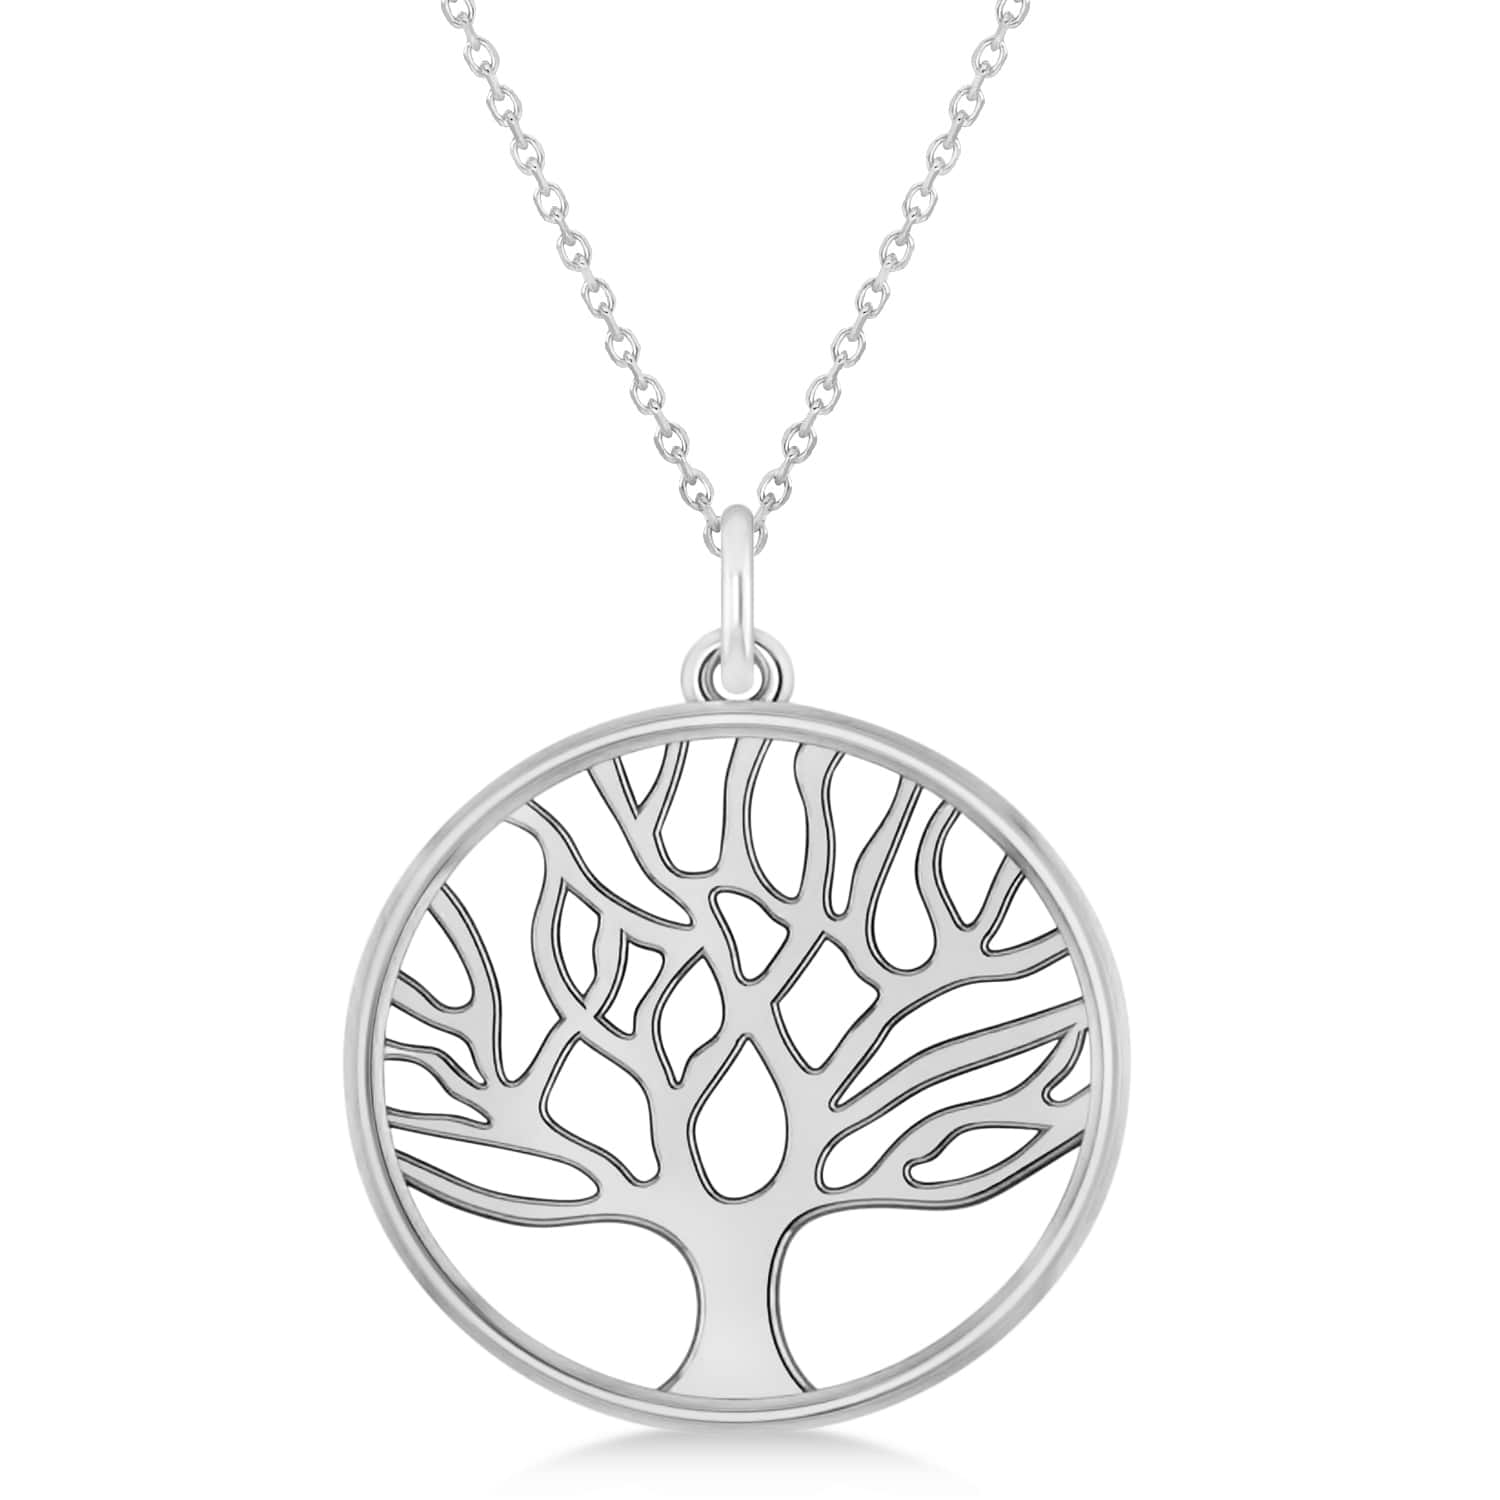 Family Tree of Life Pendant Necklace 14k White Gold